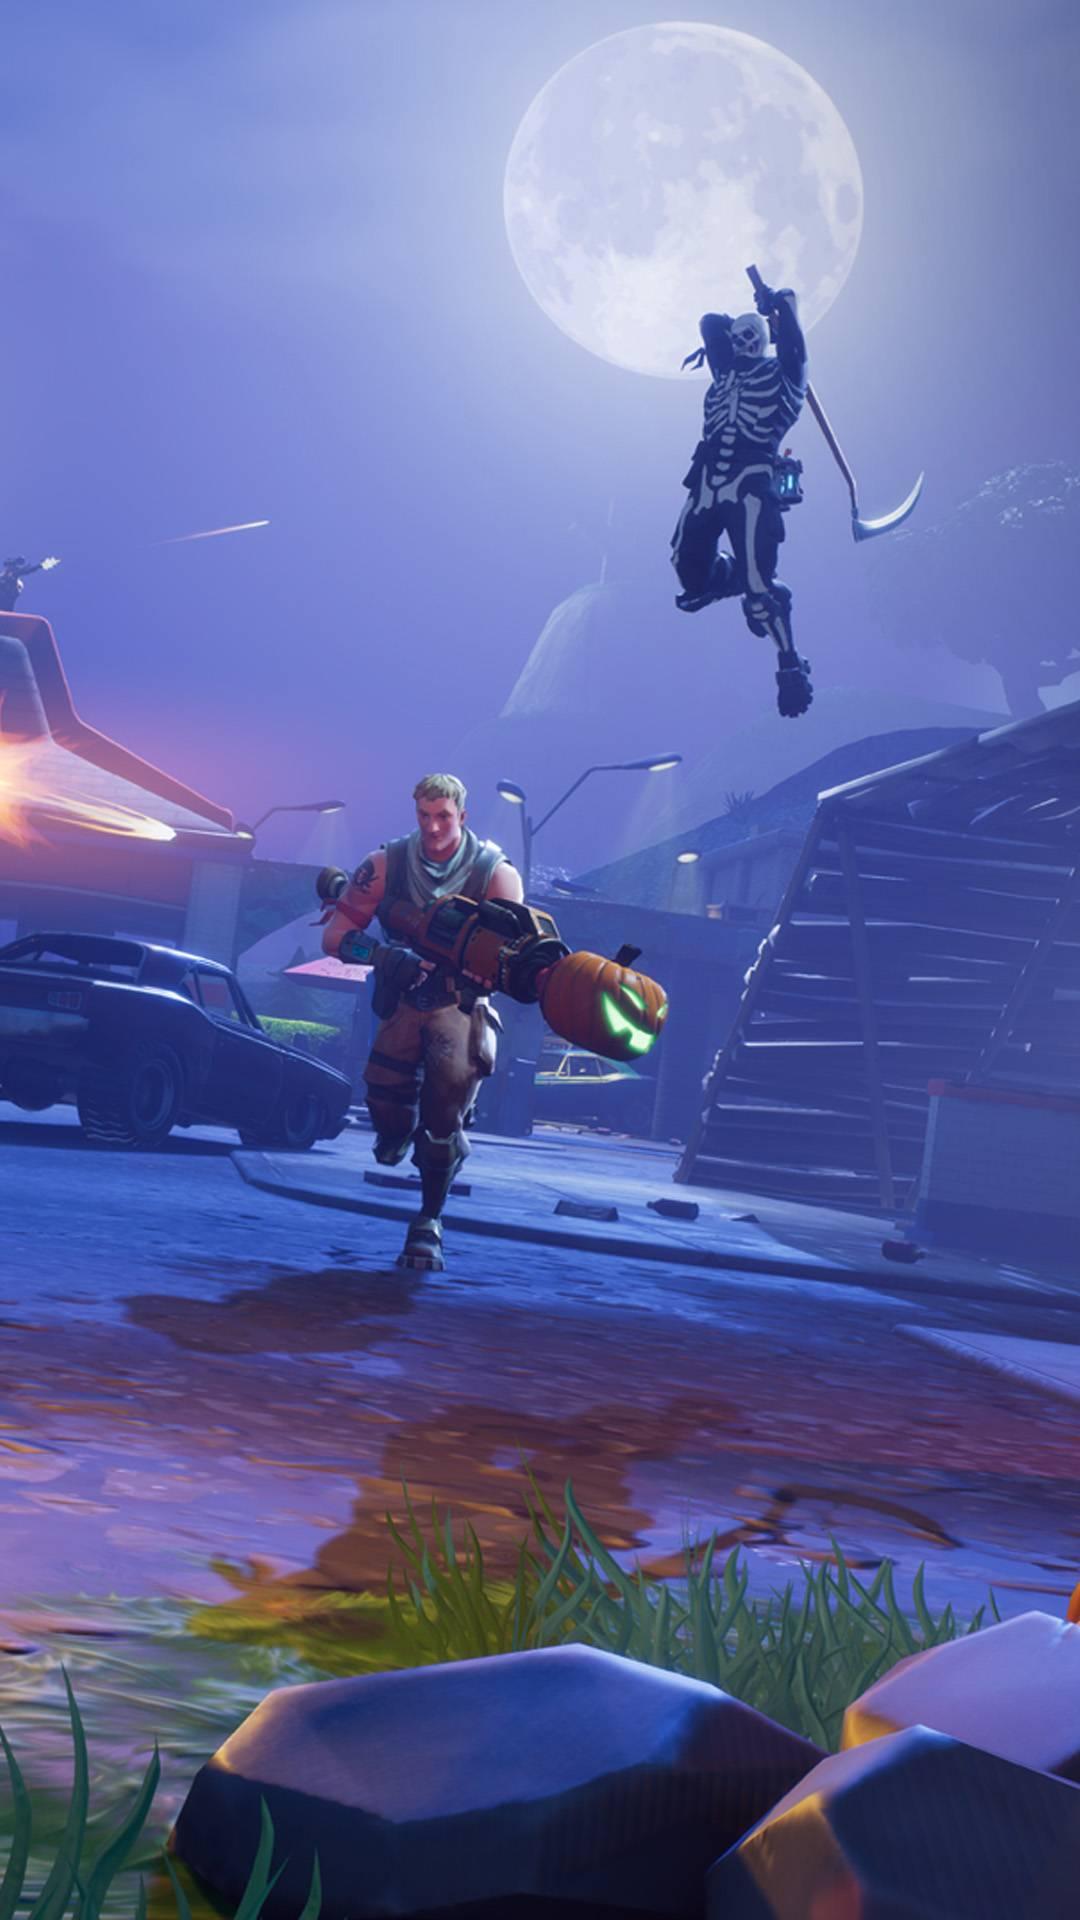 Fortnite wallpapers: Two fortnite characters run trough a dark clearing, with one brandishing a scythe on the other 